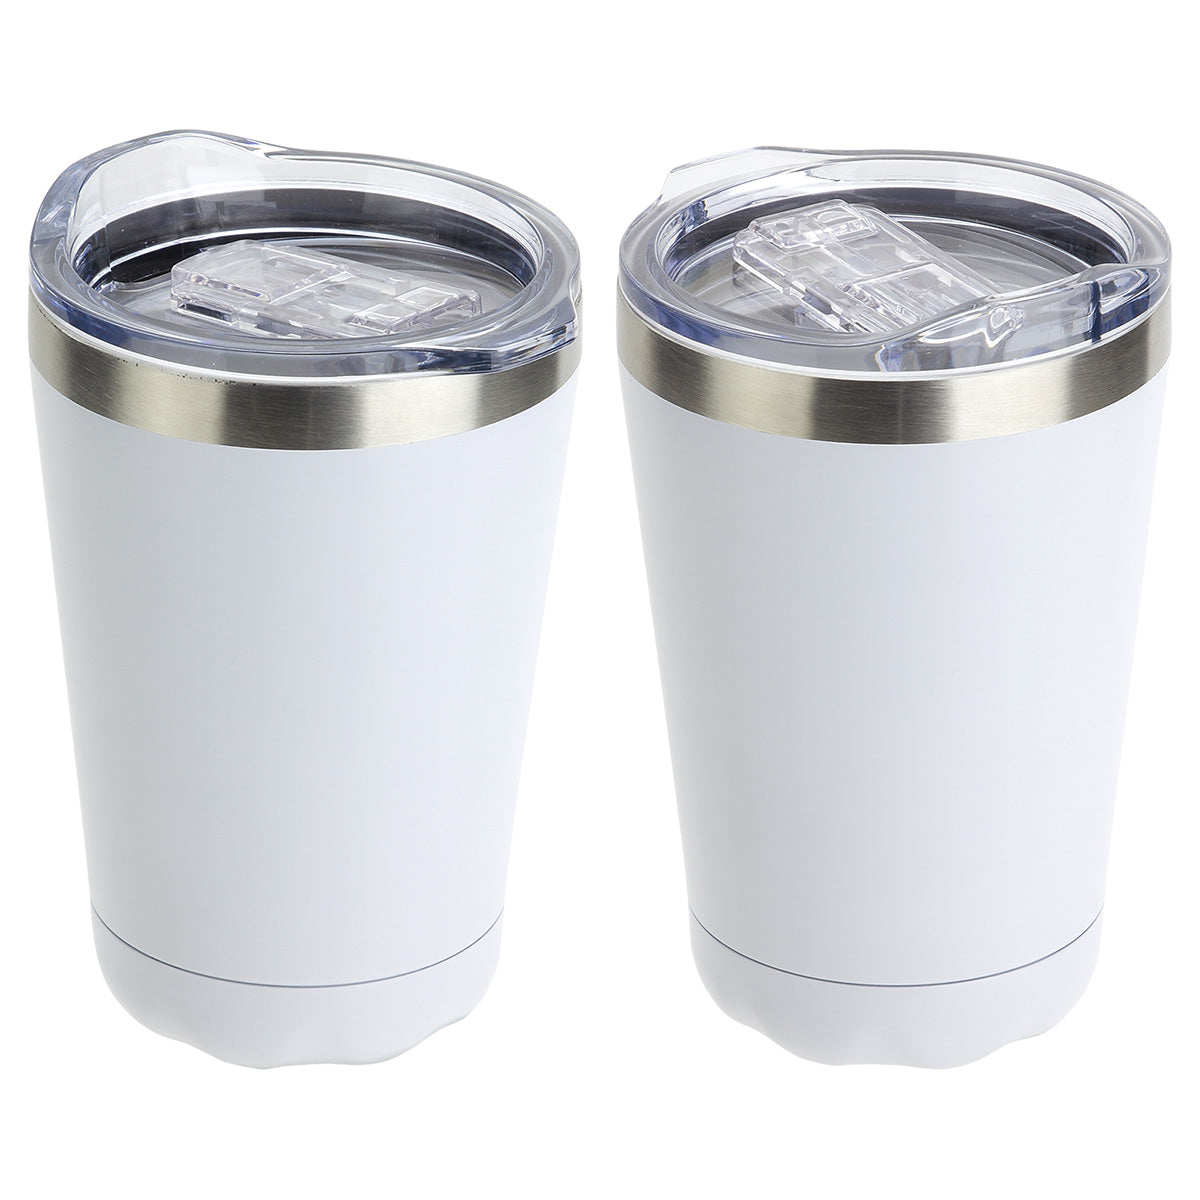 Cadet 9 oz Insulated Stainless Steel Tumbler